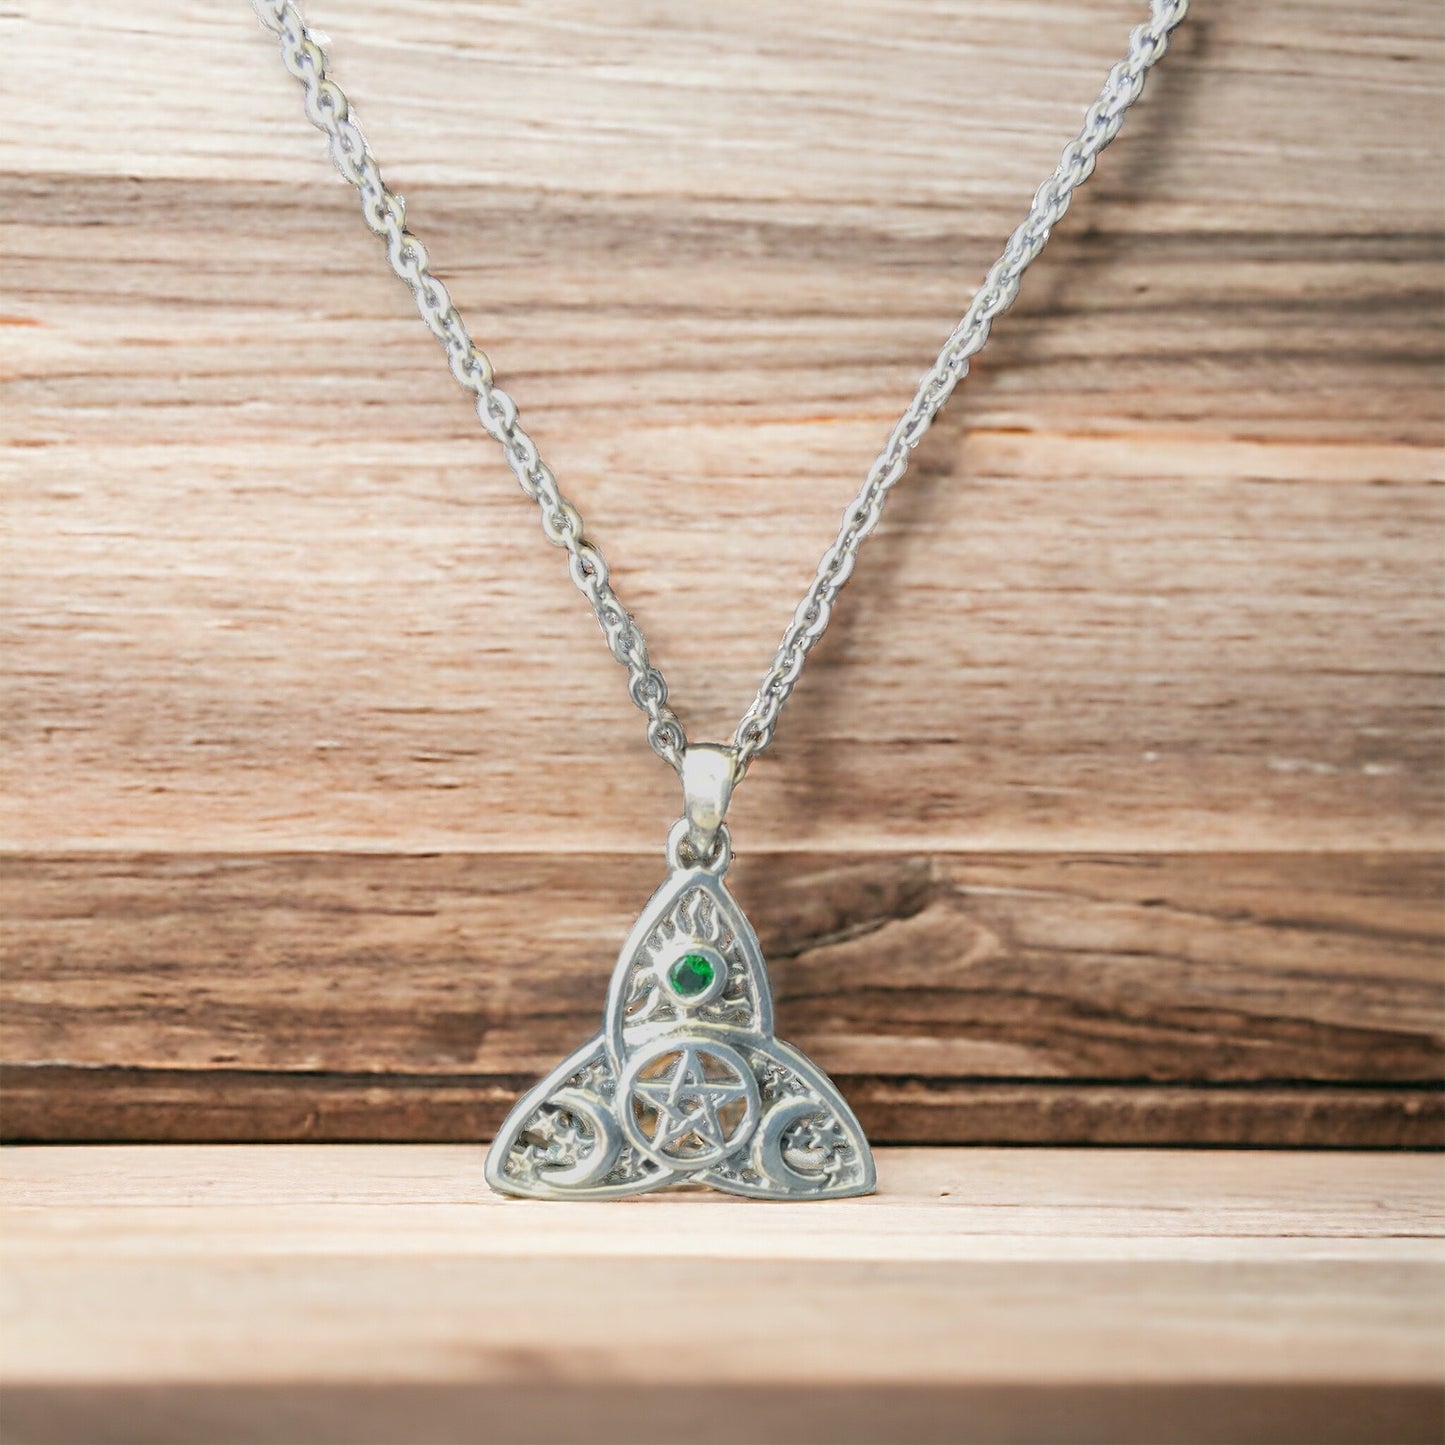 925 Sterling Silver Irish Celtic Triquetra Trinity Knot Moon Star Pentacle Pendant + Free Chain Necklace